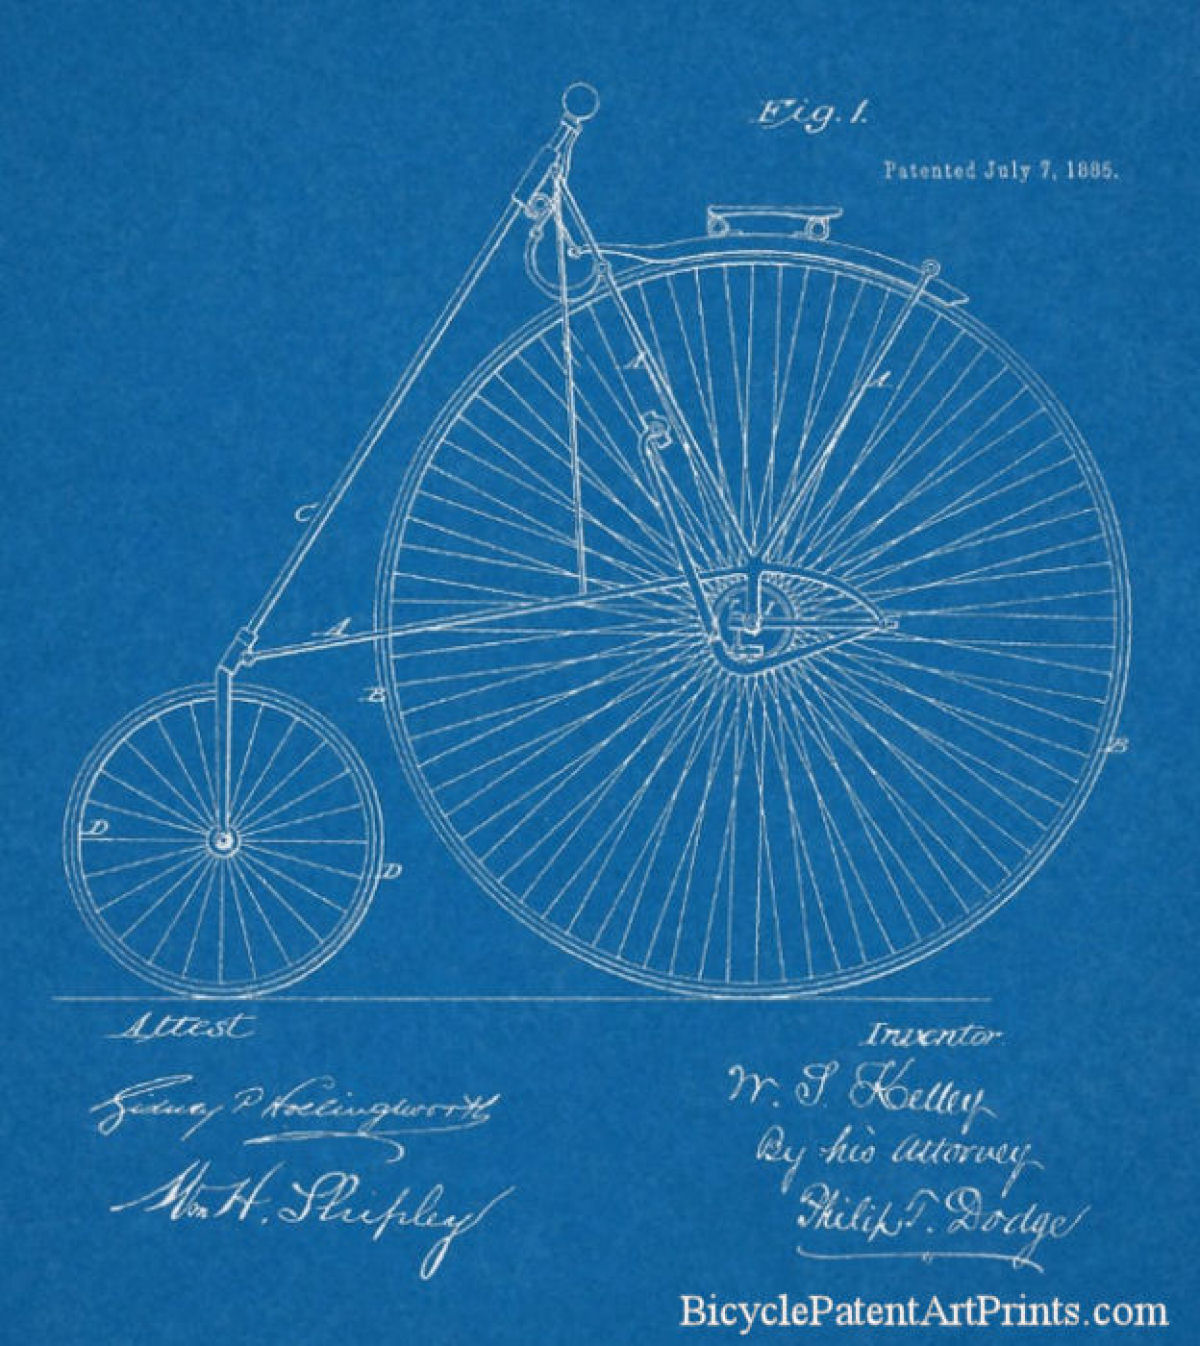 1885 High wheeler lever propelled bicycle